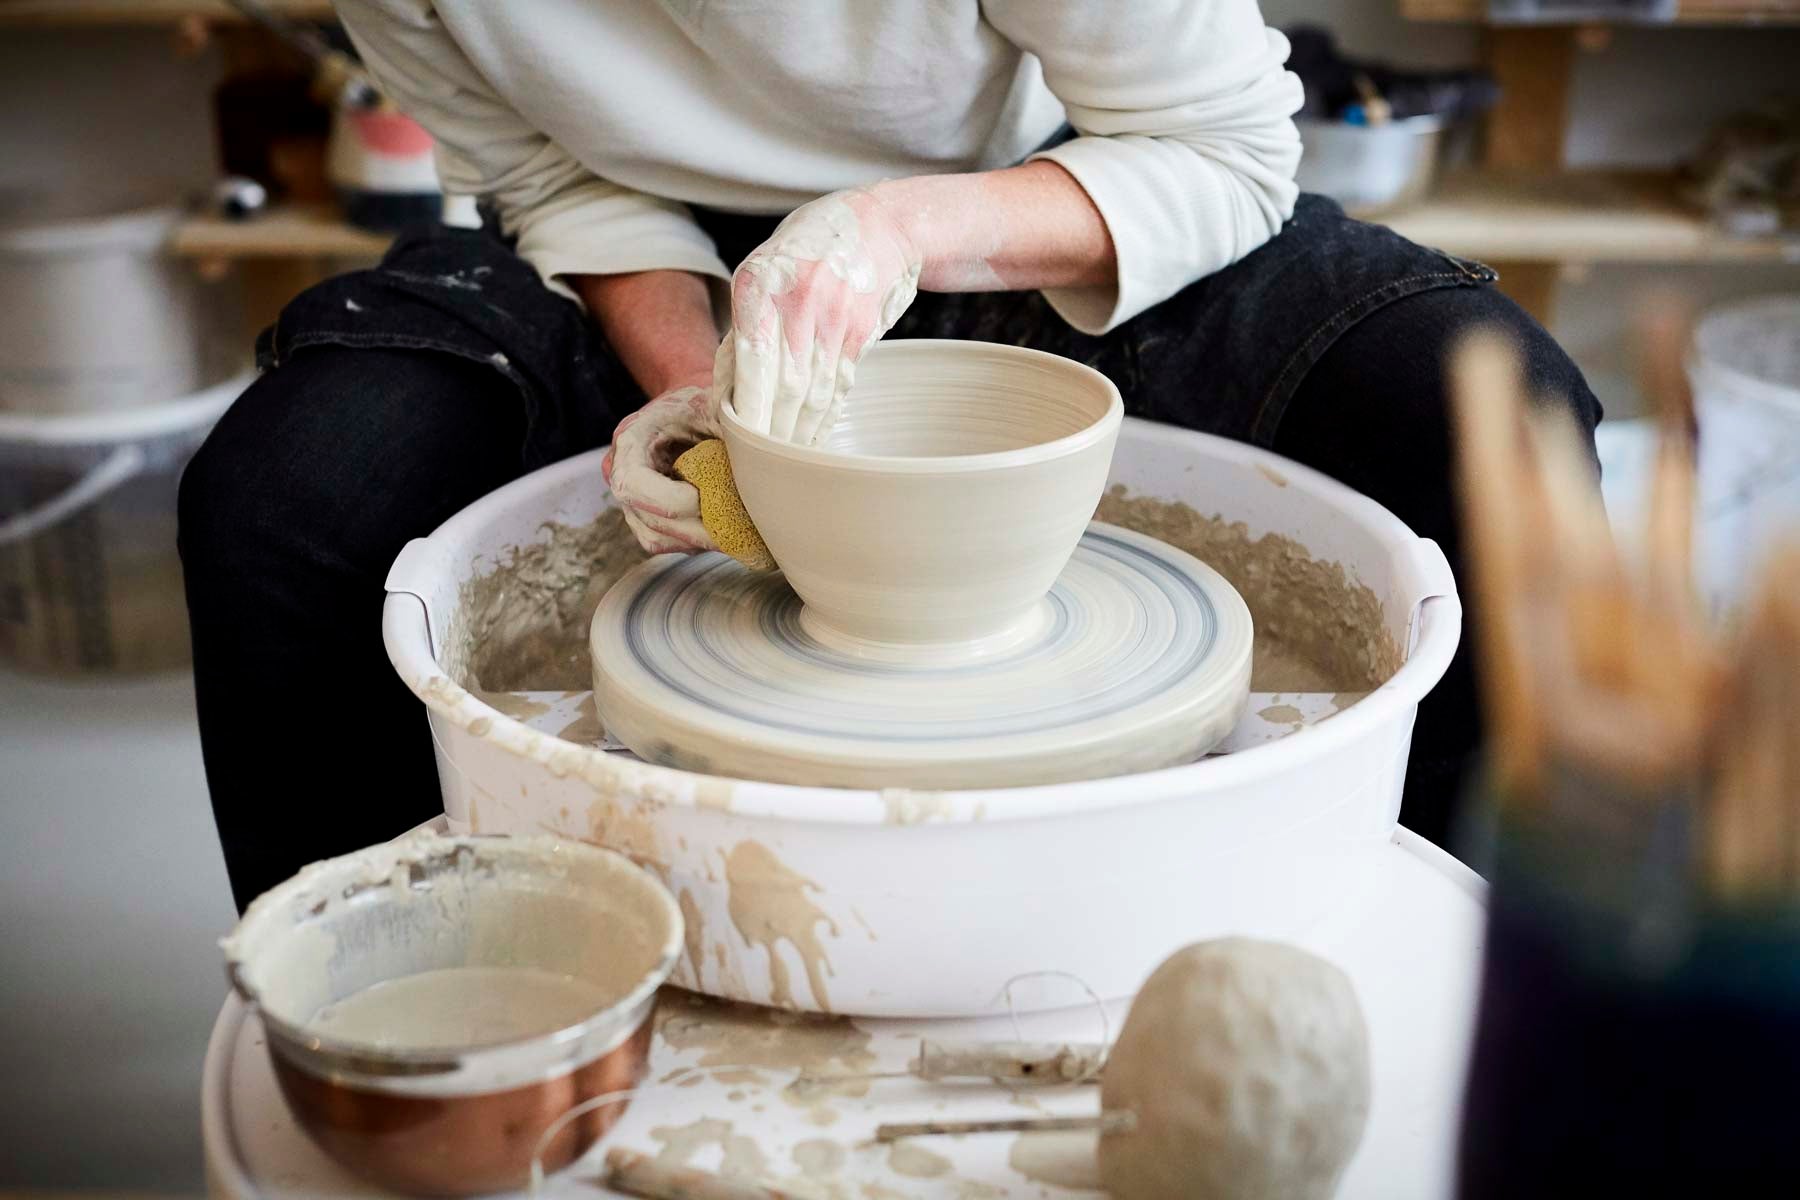 "Wheel Throwing or Hand Building" Ceramic Workshop with Tiziana in Berlin, Germany